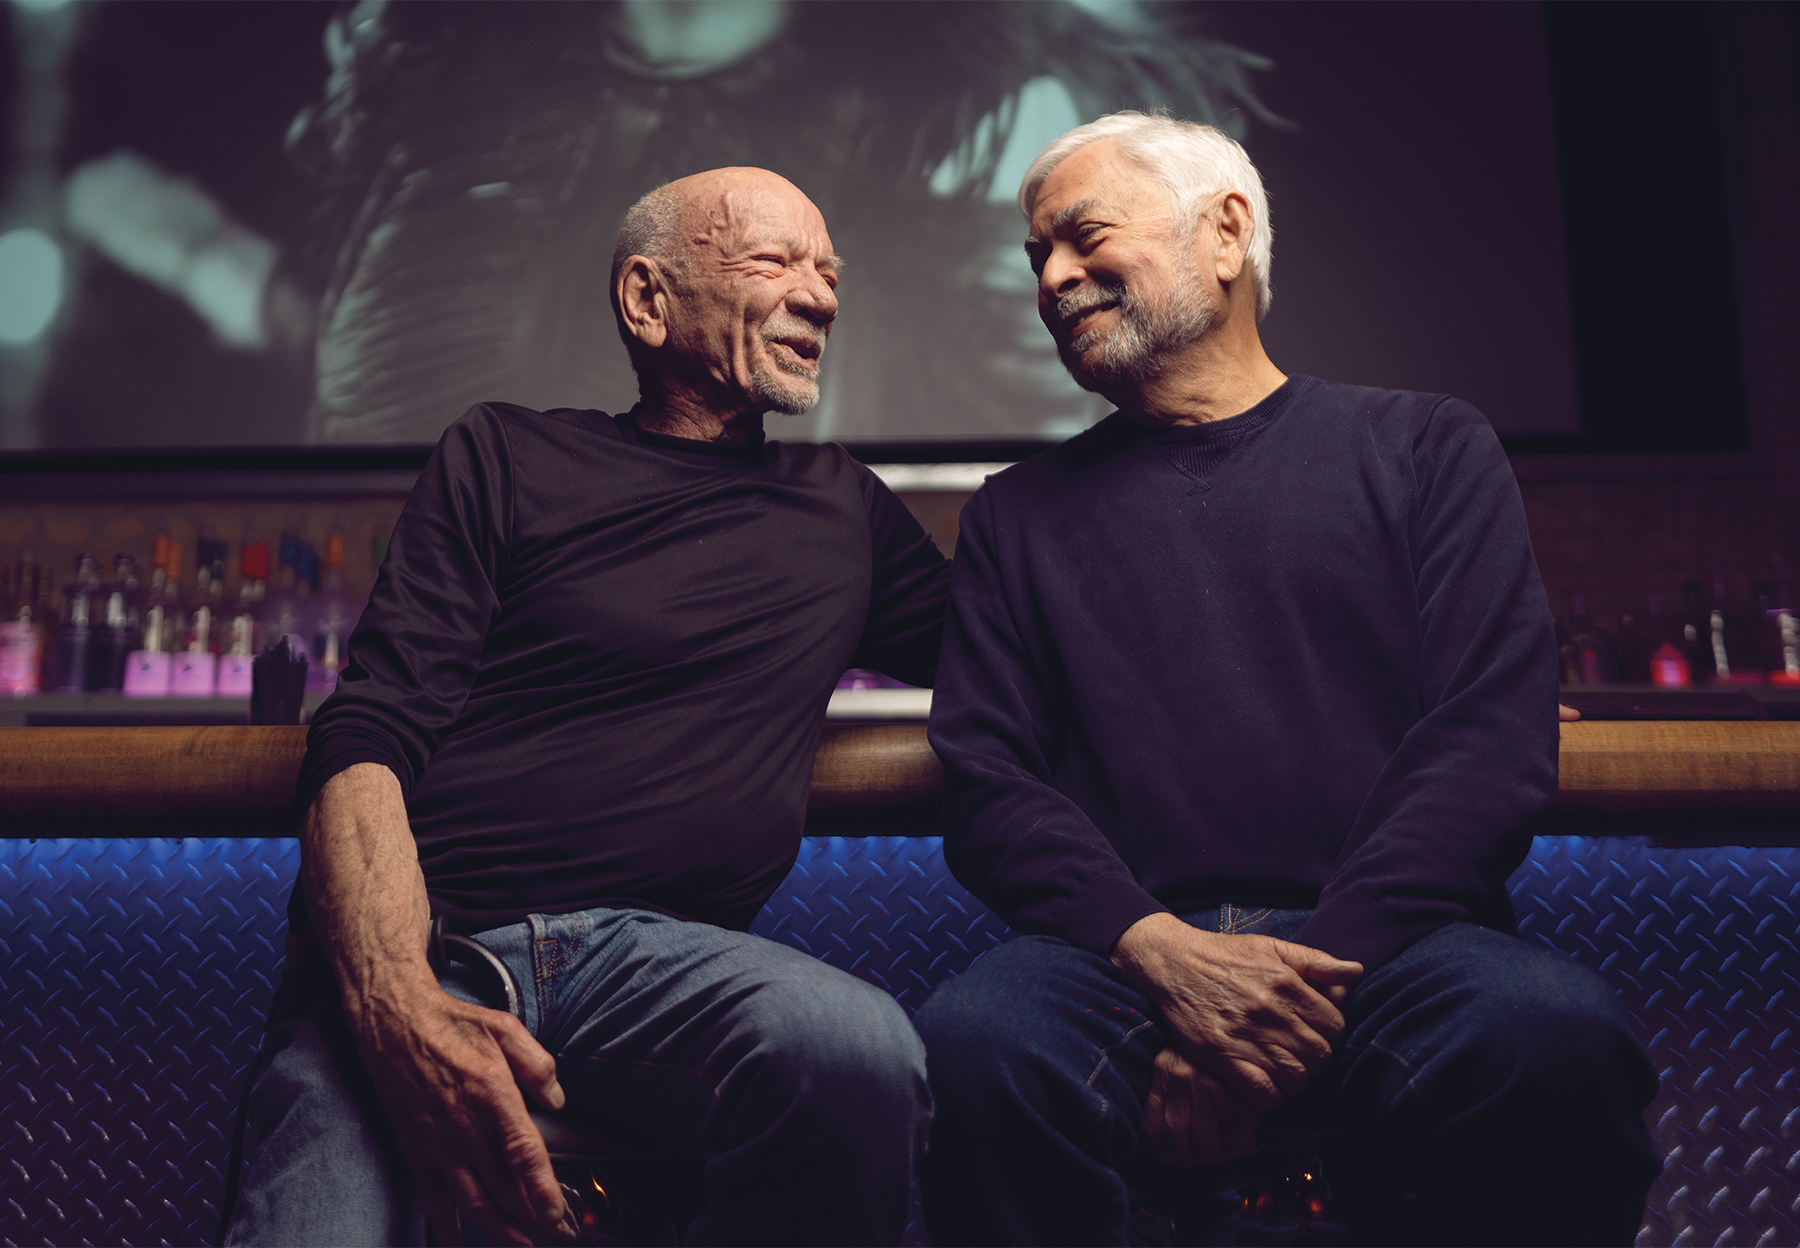 Art Johnston and Pep Peña sit next to each other on bar stools in Sidetrack. They are looking at each other and smiling. Behind them is a large projector screen showing a music video.